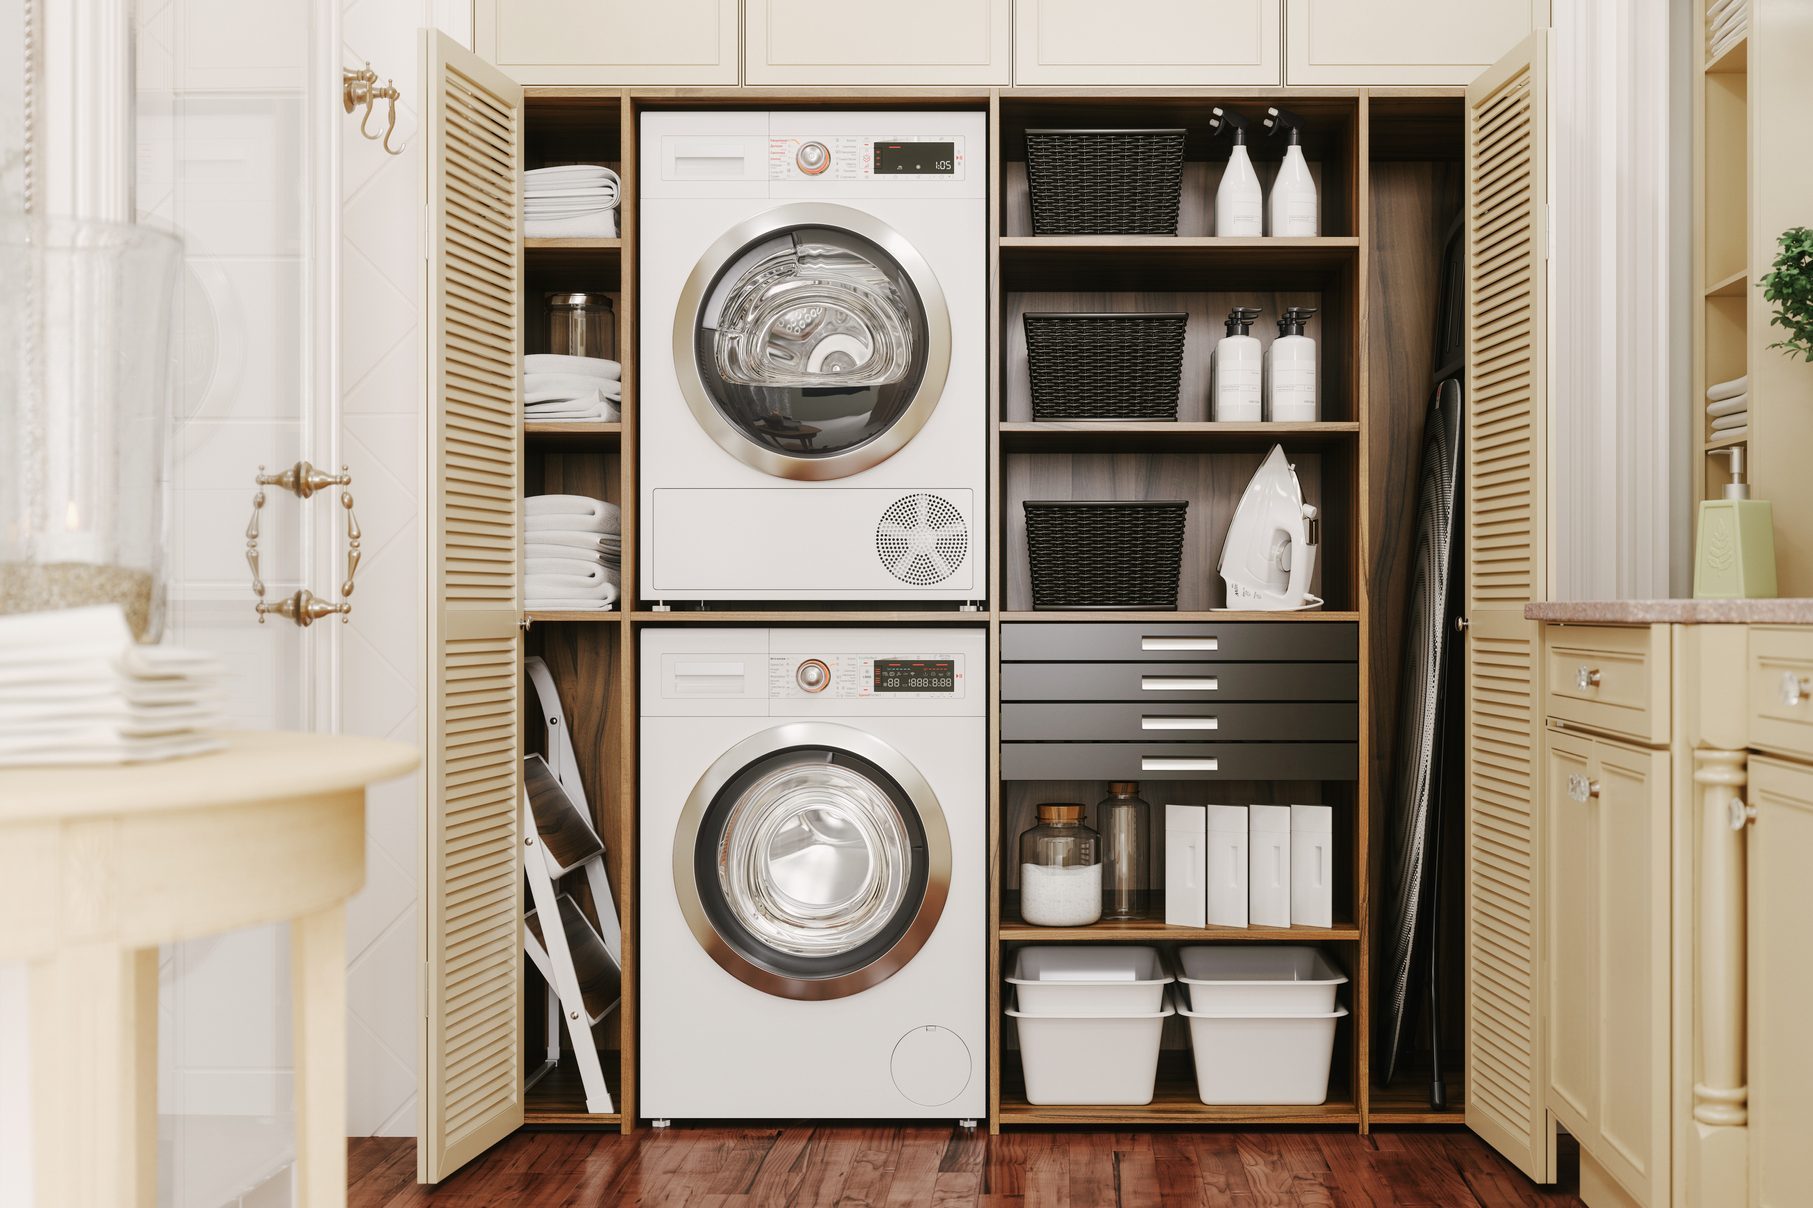 Interior of a modern laundry room